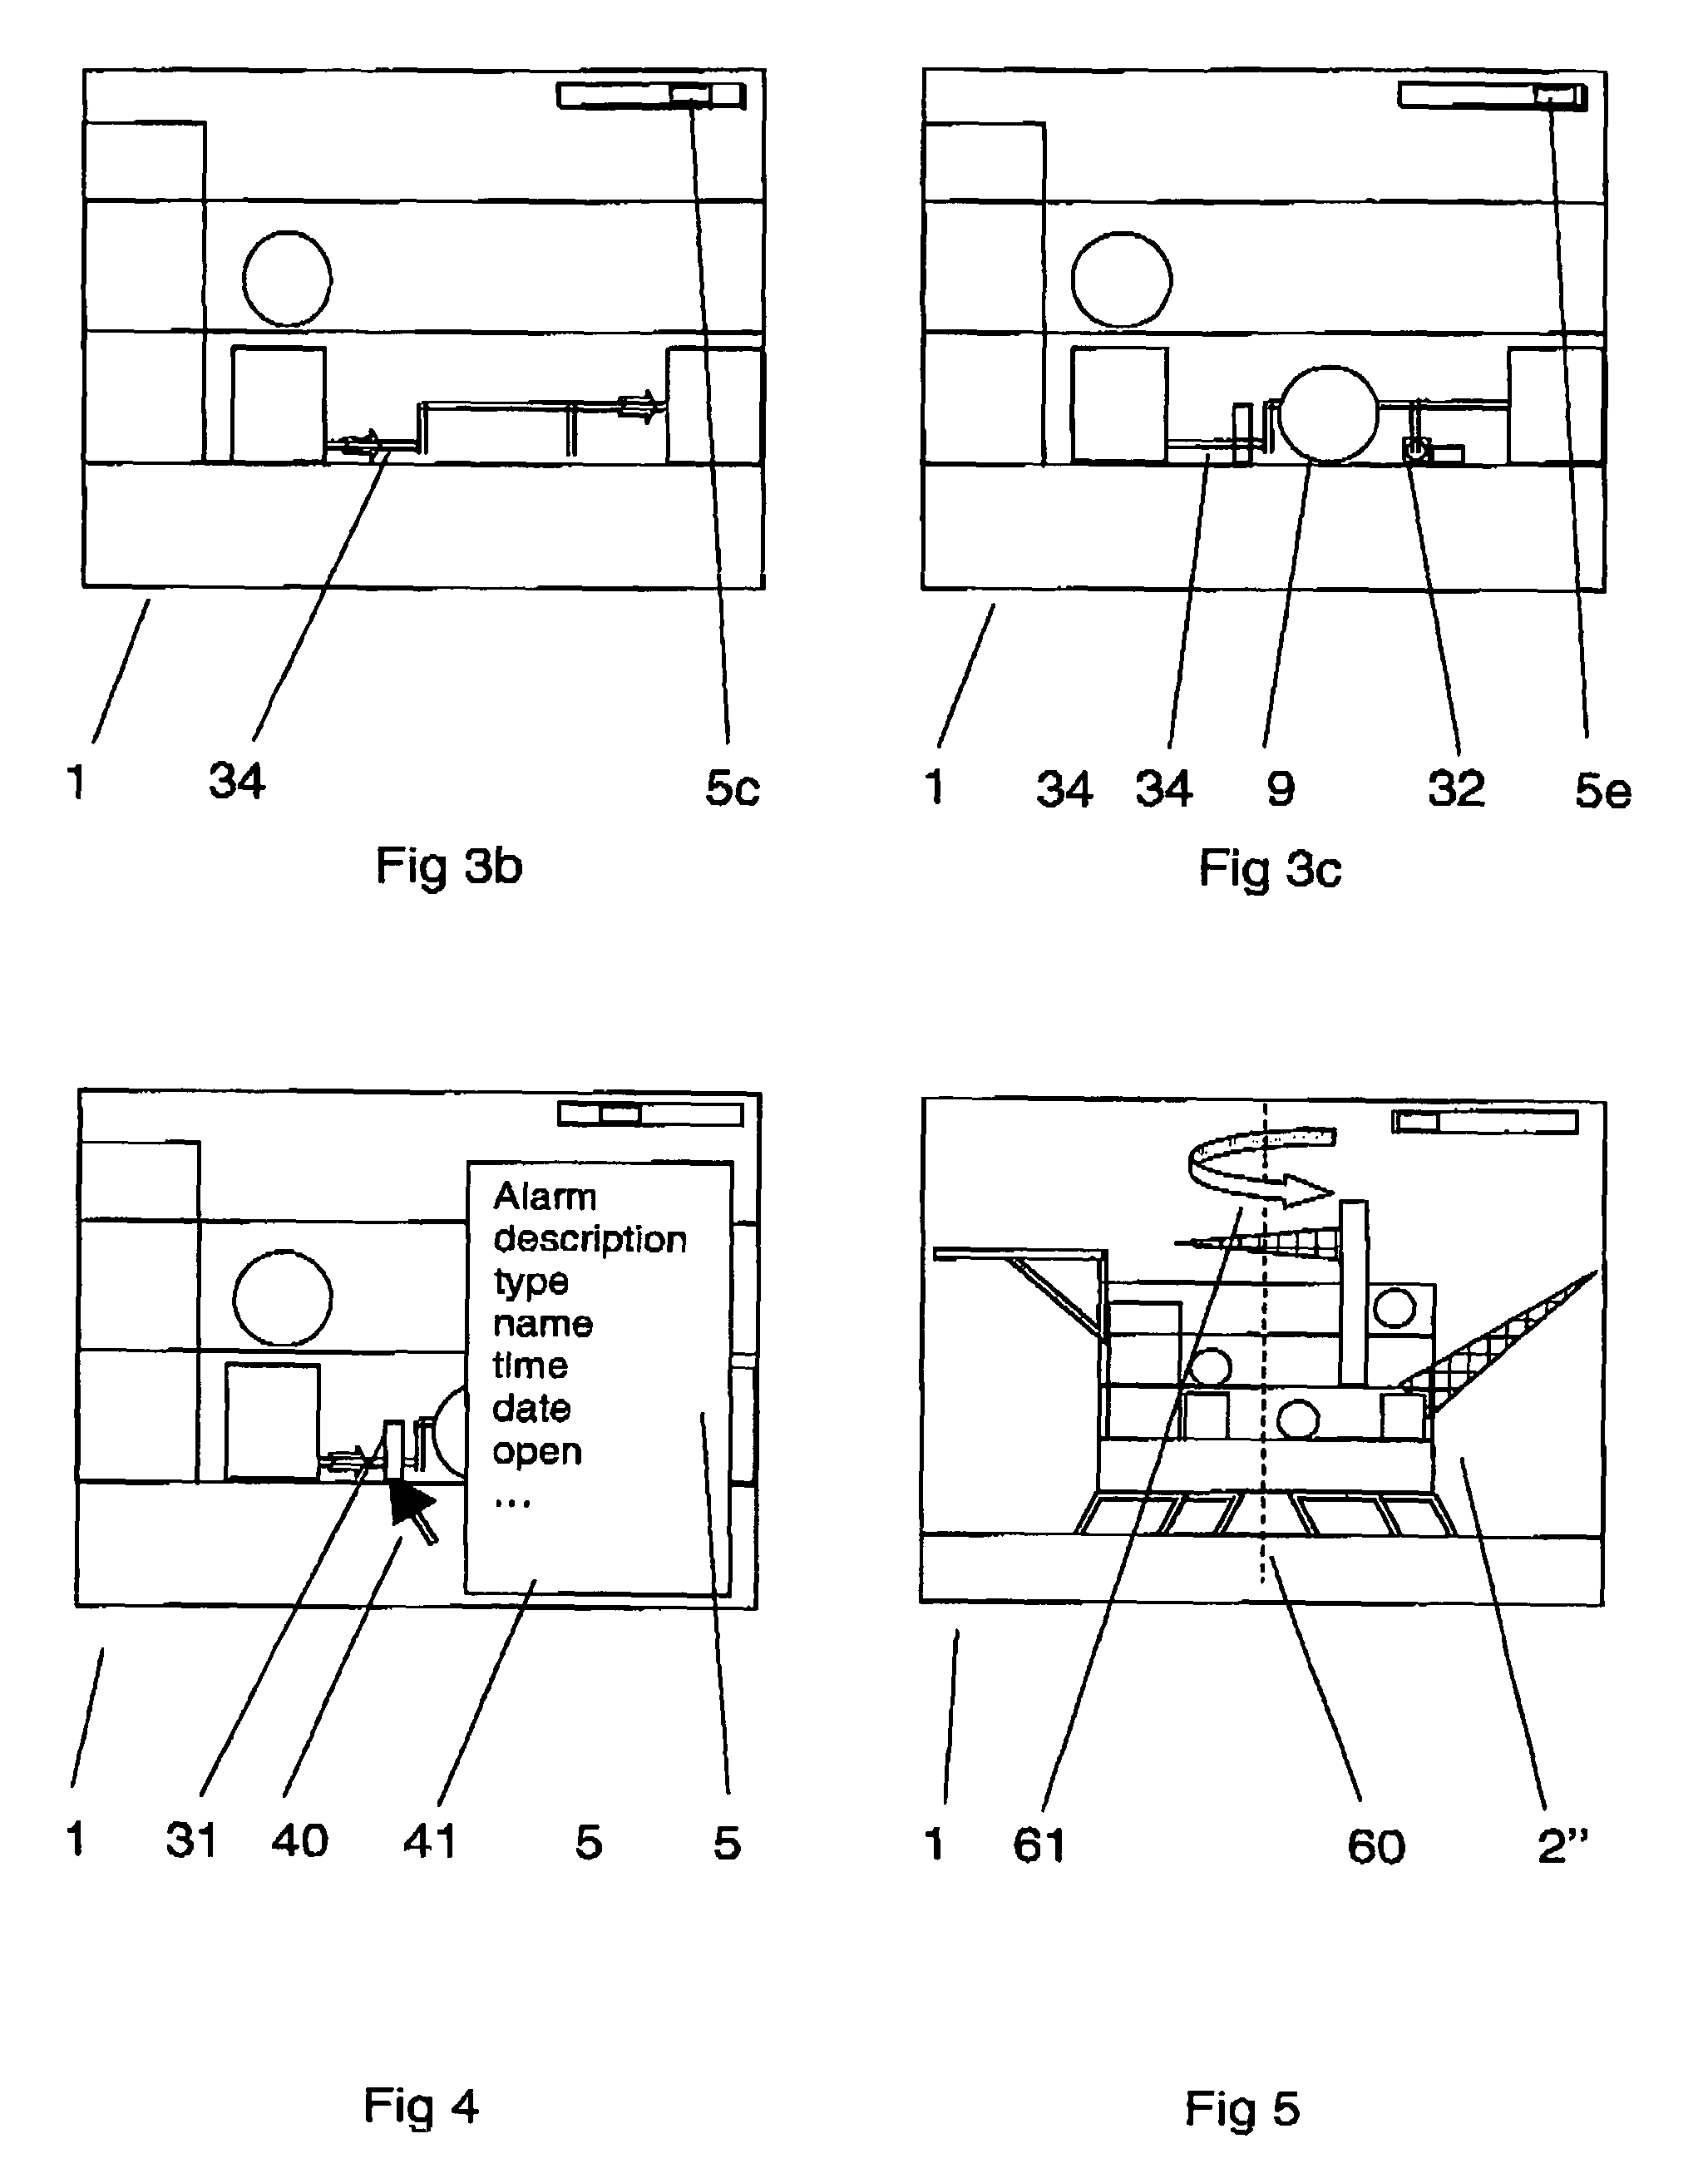 Human-machine interface for a control system